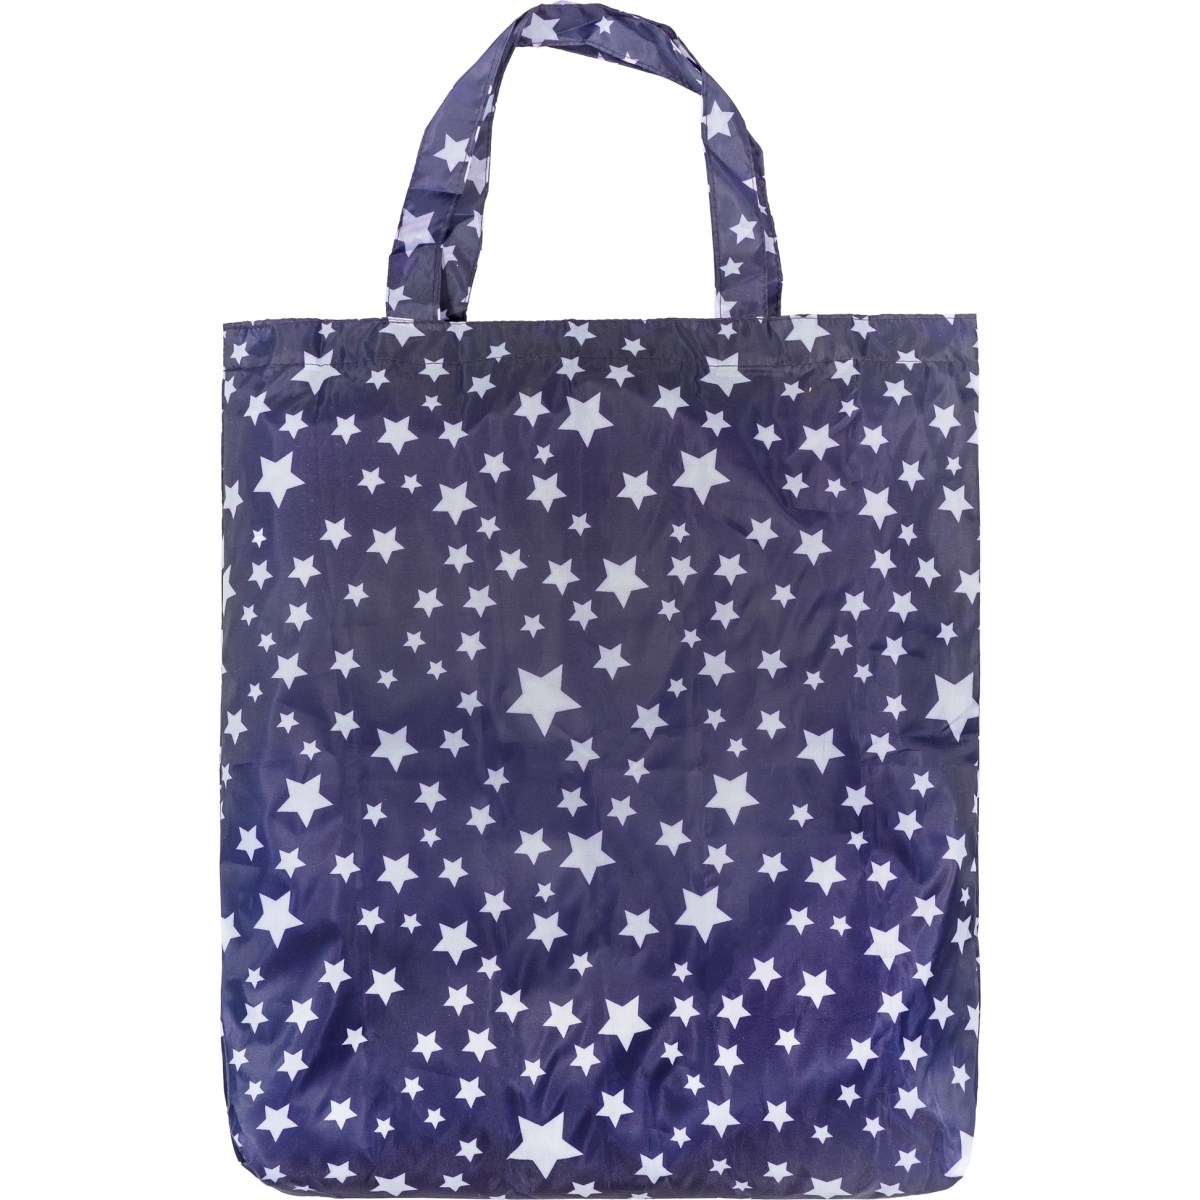 20 star bags for Spring